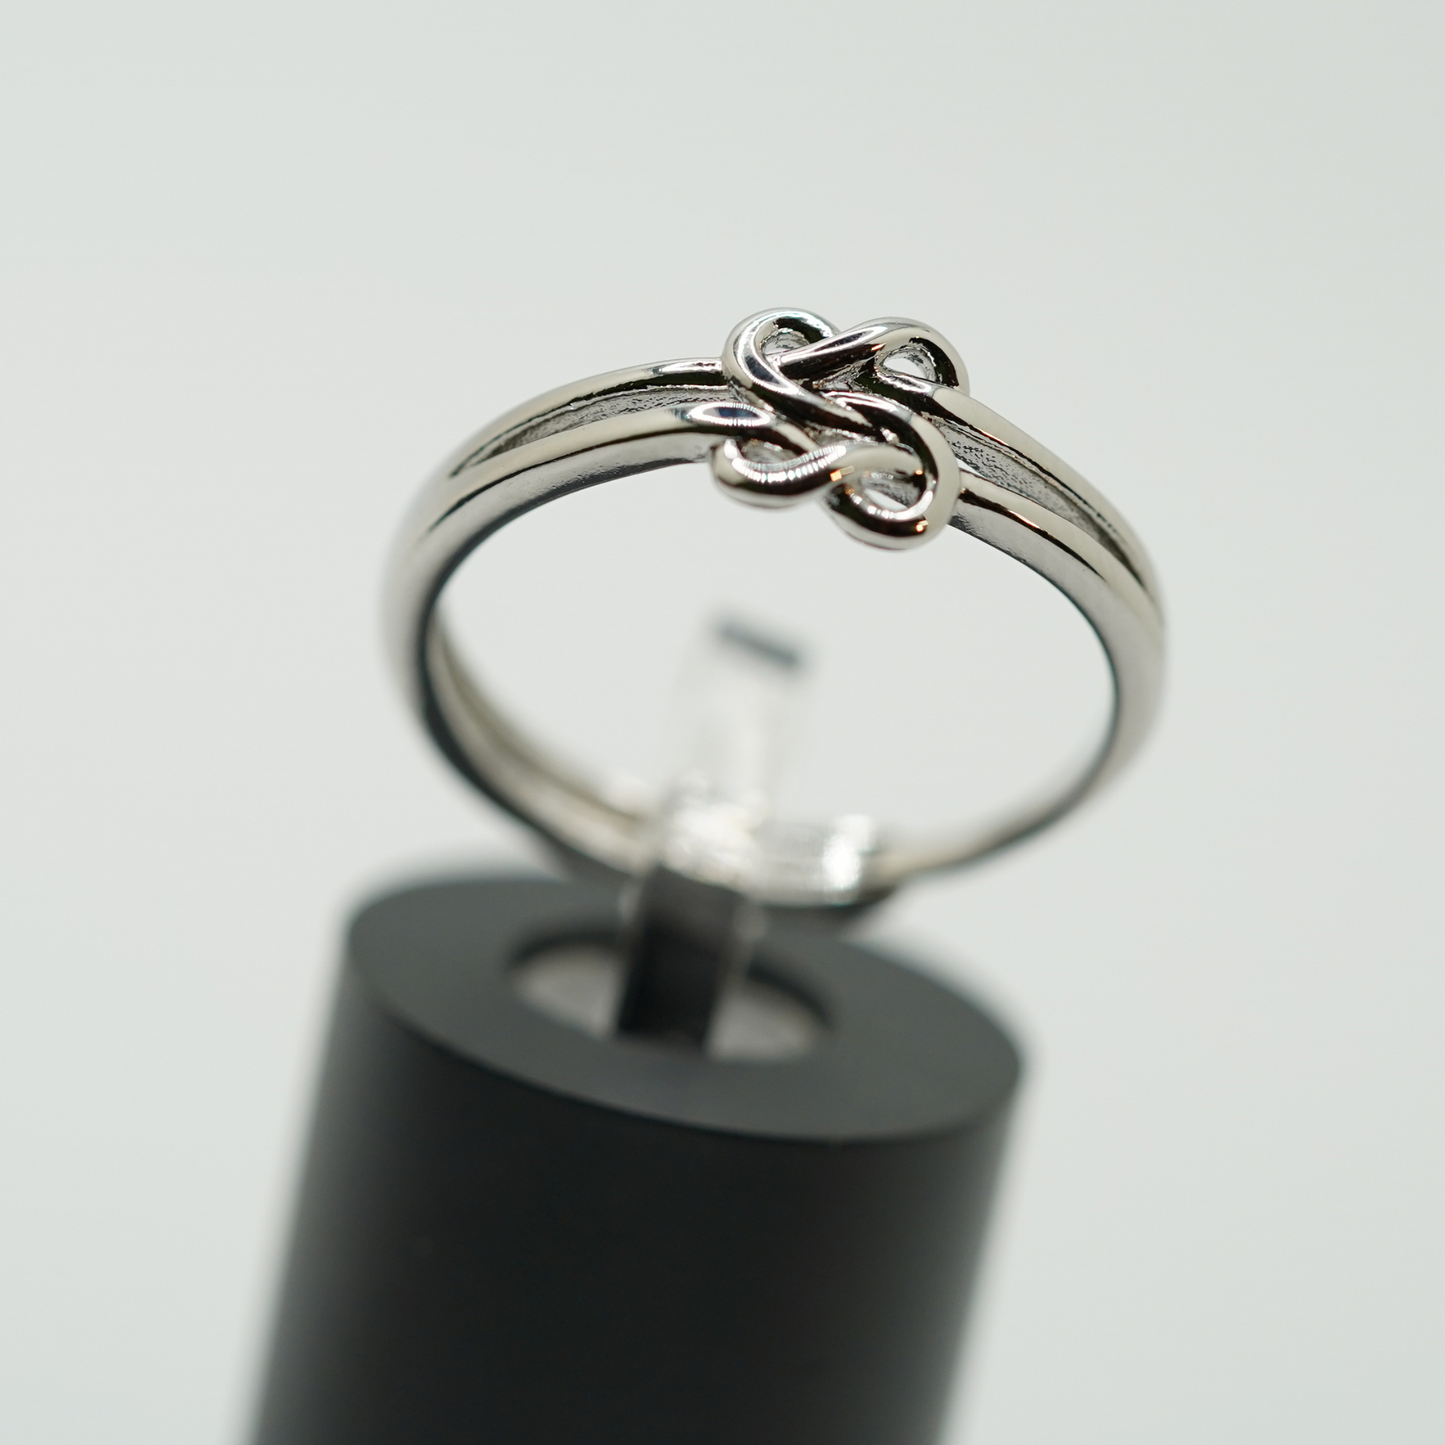 To My Daughter Infinity Love Ring